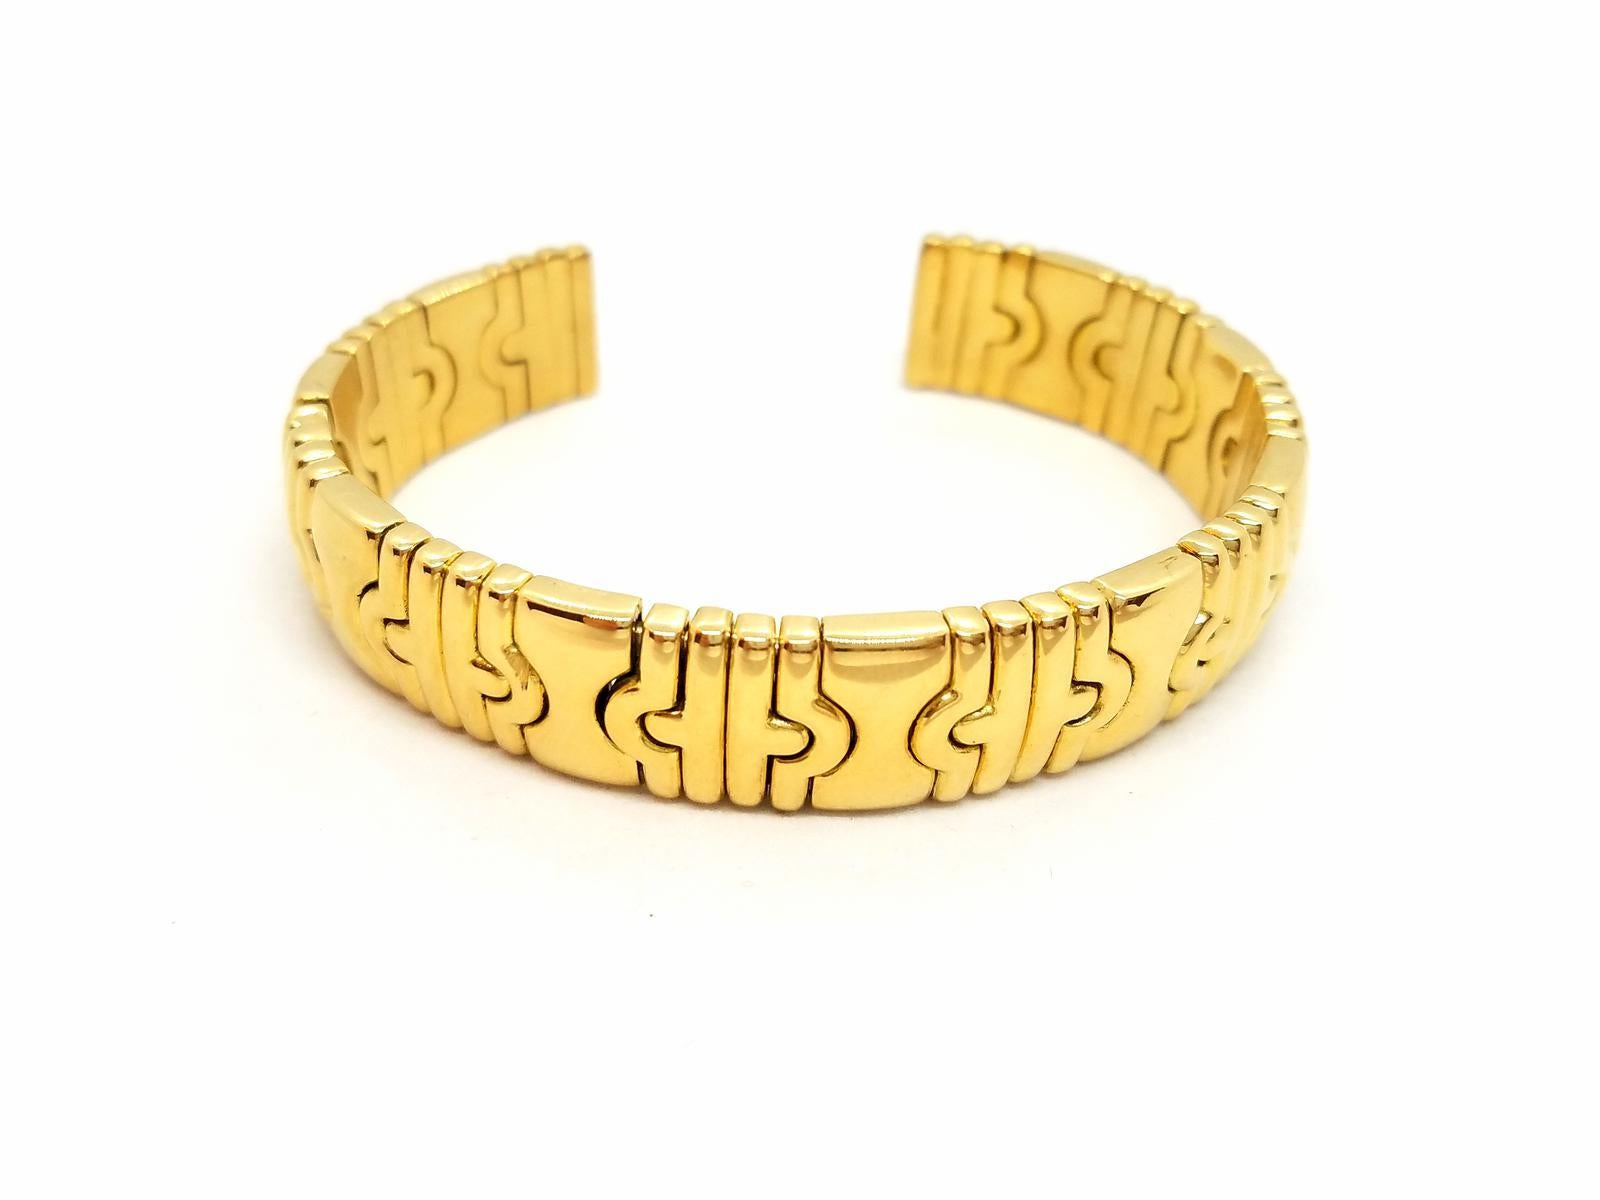 Bracelet semi rigid open. golden yellow 750 mils (18K) solid. patterned. wrist circumference up to 20 cm. inner diameter: 6 cm x 5 cm. width: 1.3 cm. total weight: 73.14 g. punch eagle's head. excellent condition
